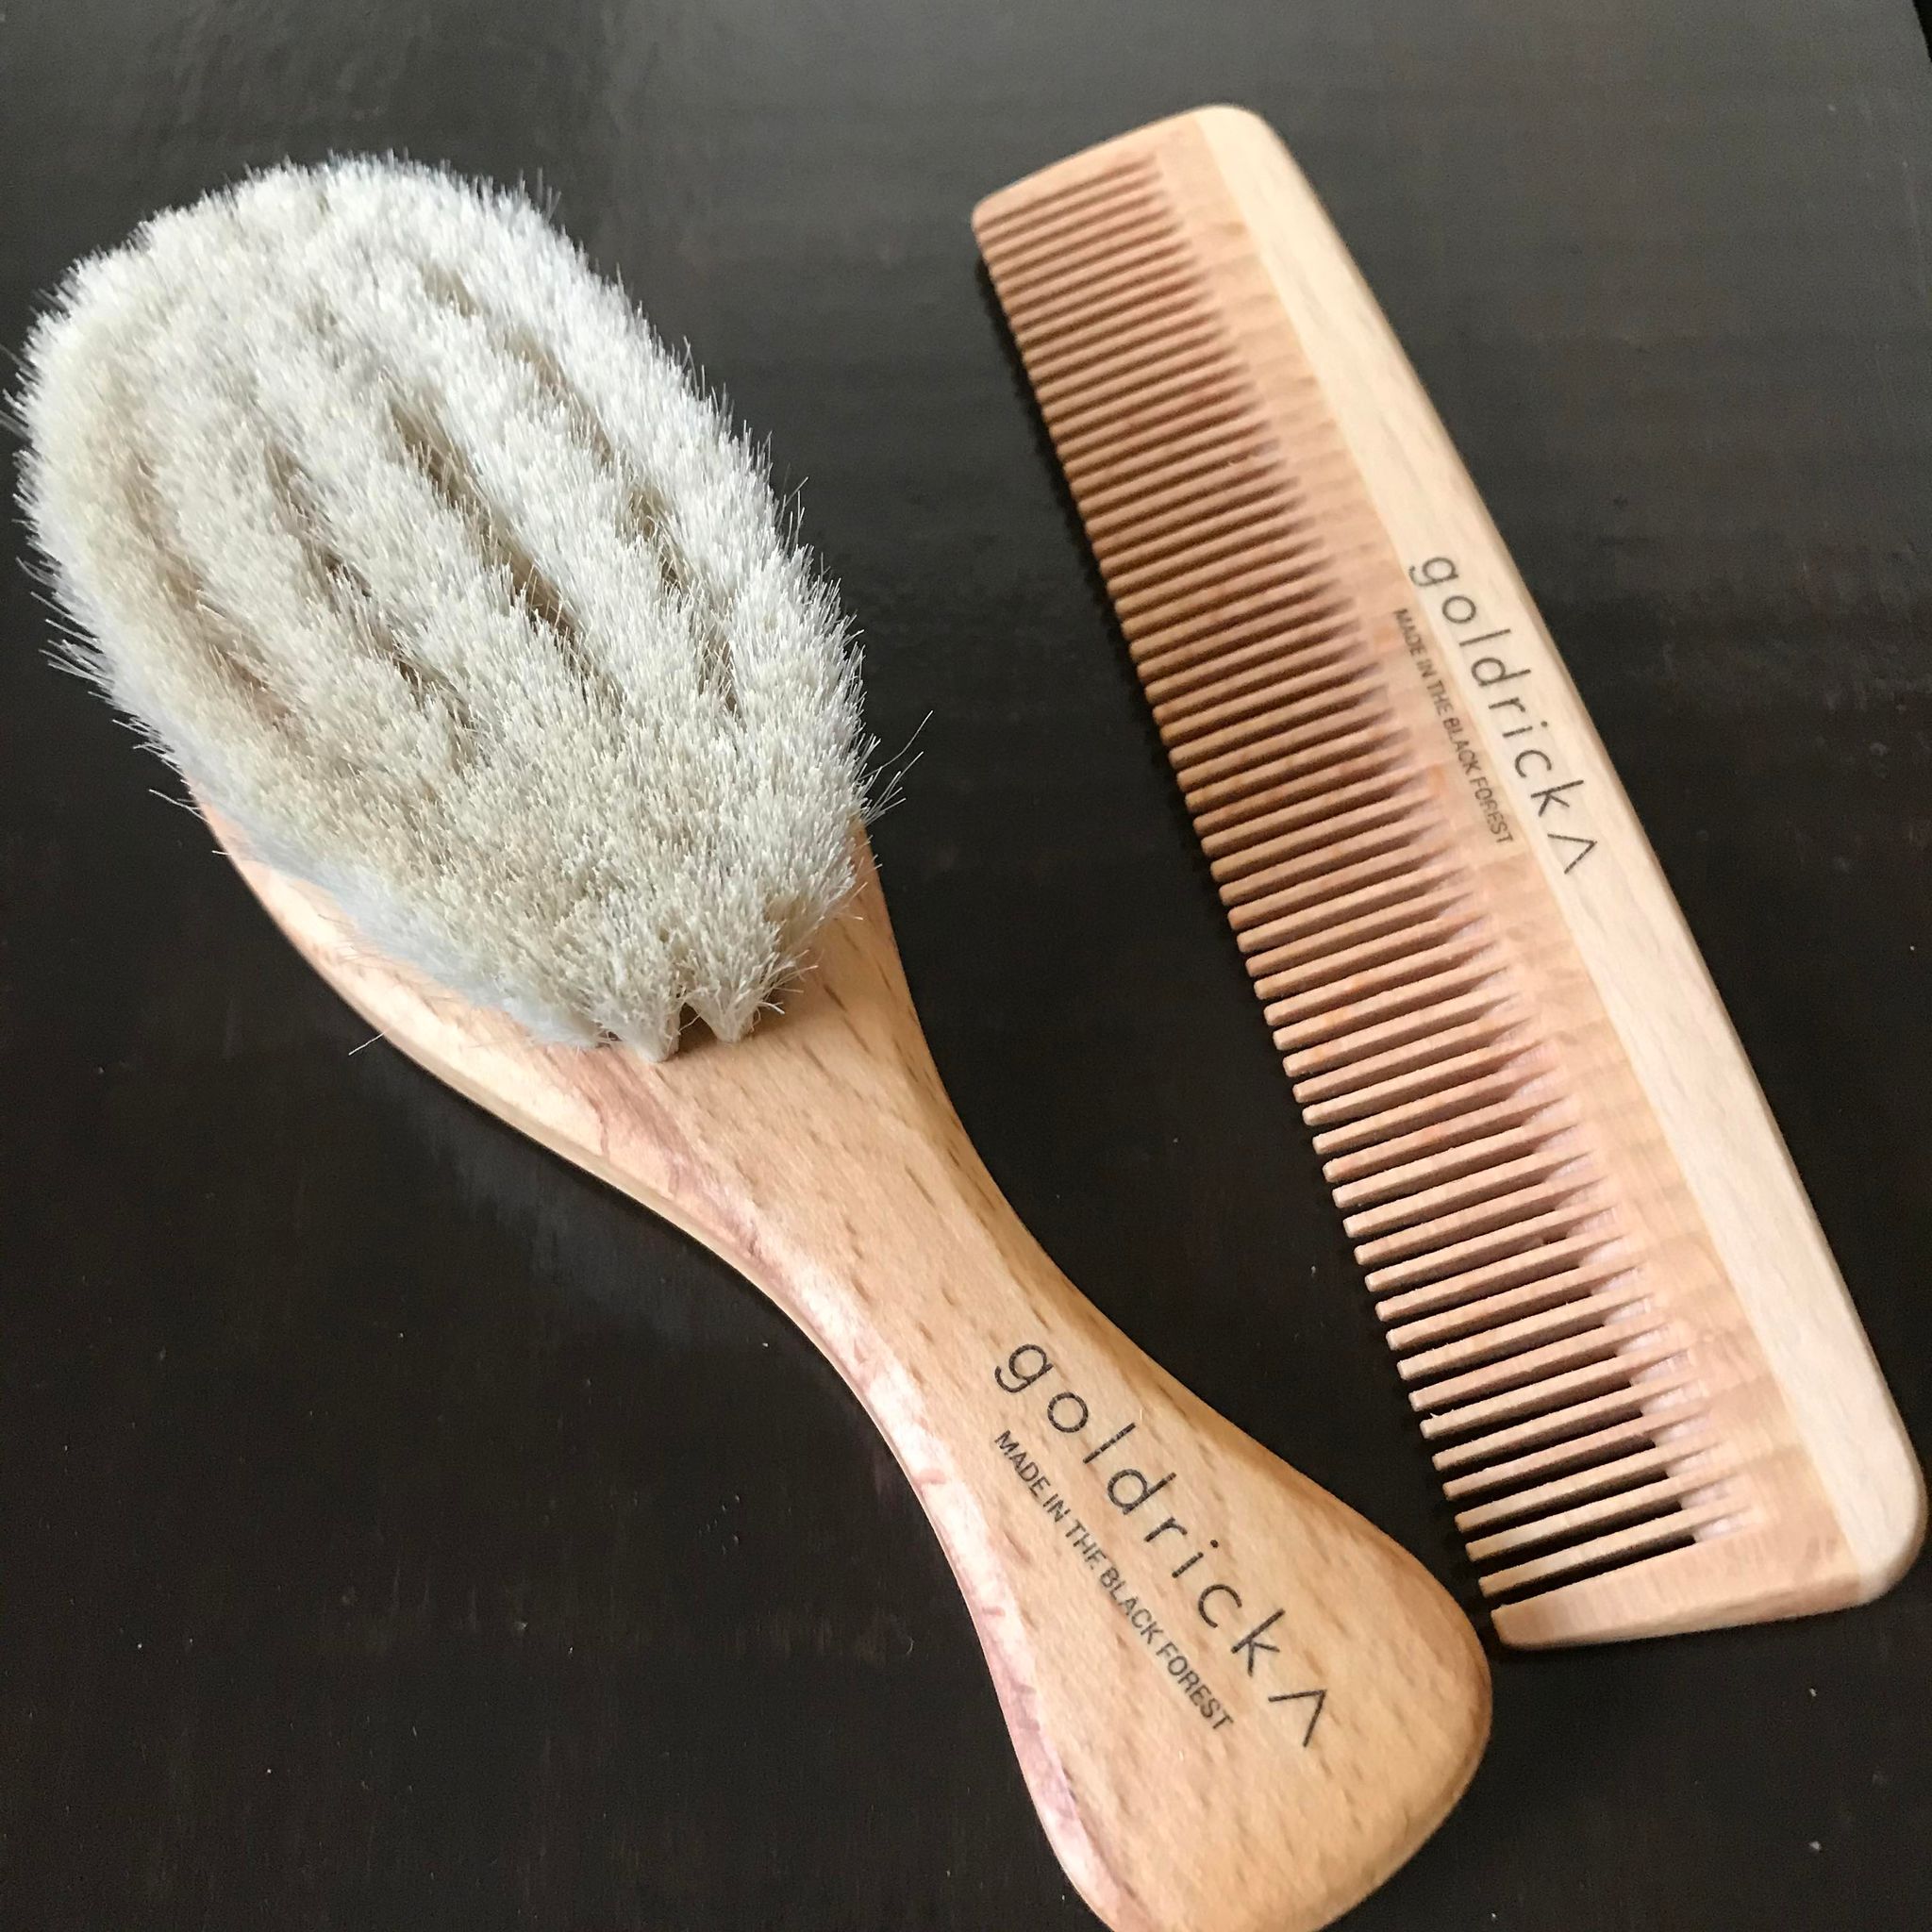 Goldrick Natural Living baby brush set with soft hairbrush and wooden comb handcrafted in a small family owned brushworks in the Black Forest, Germany 